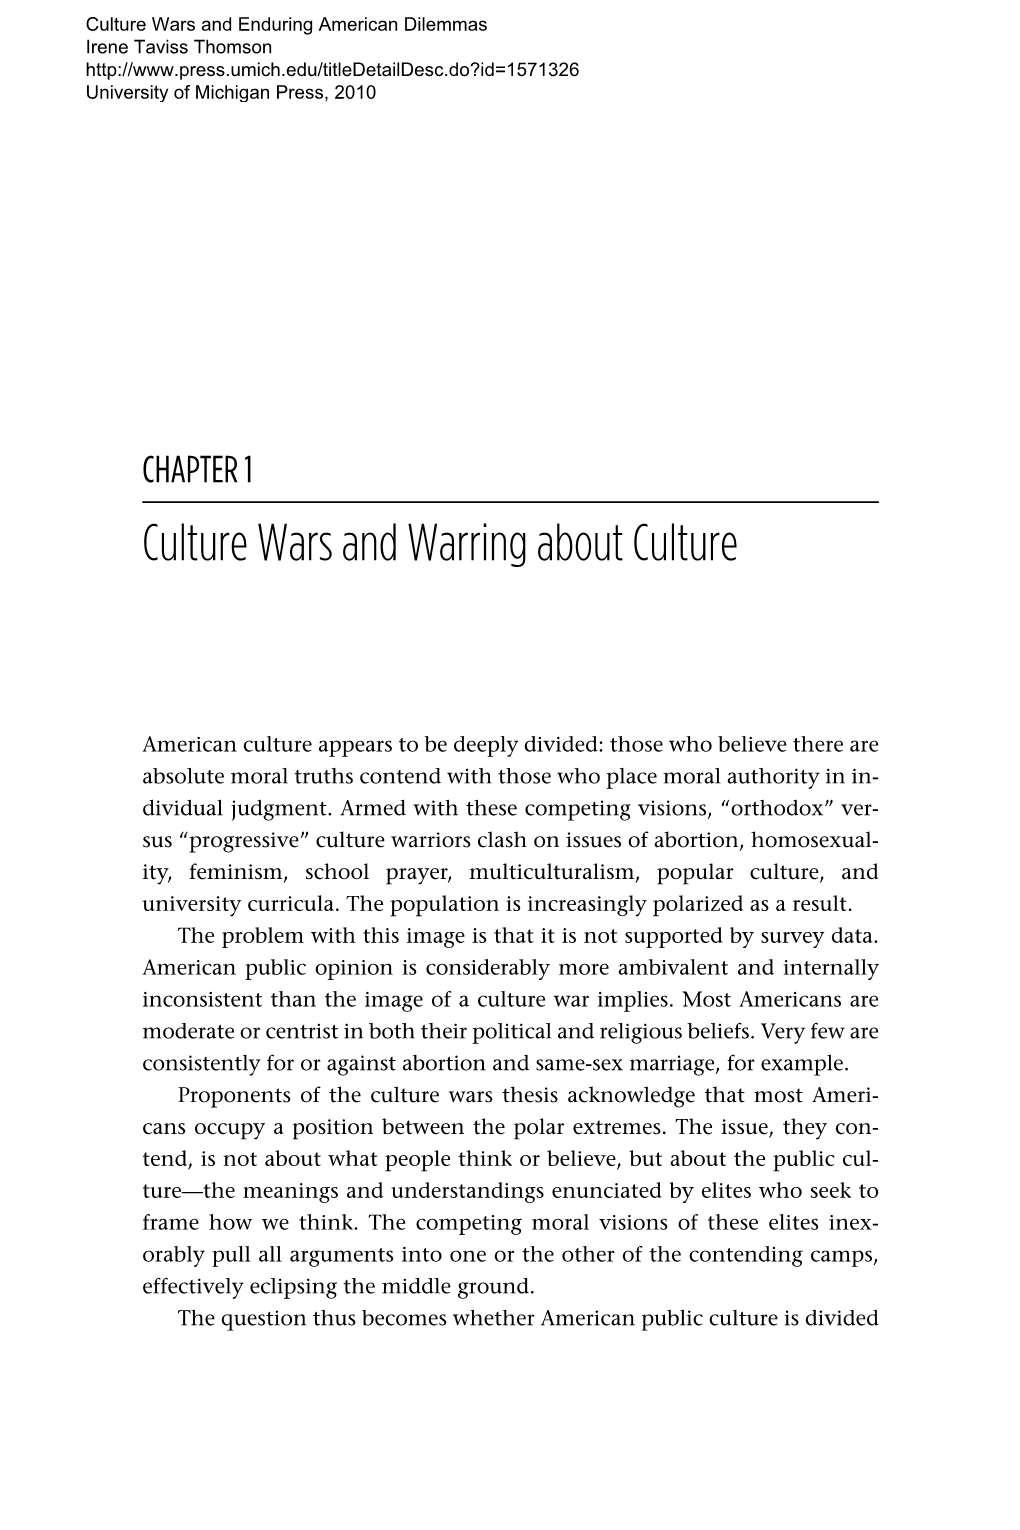 Culture Wars and Warring About Culture